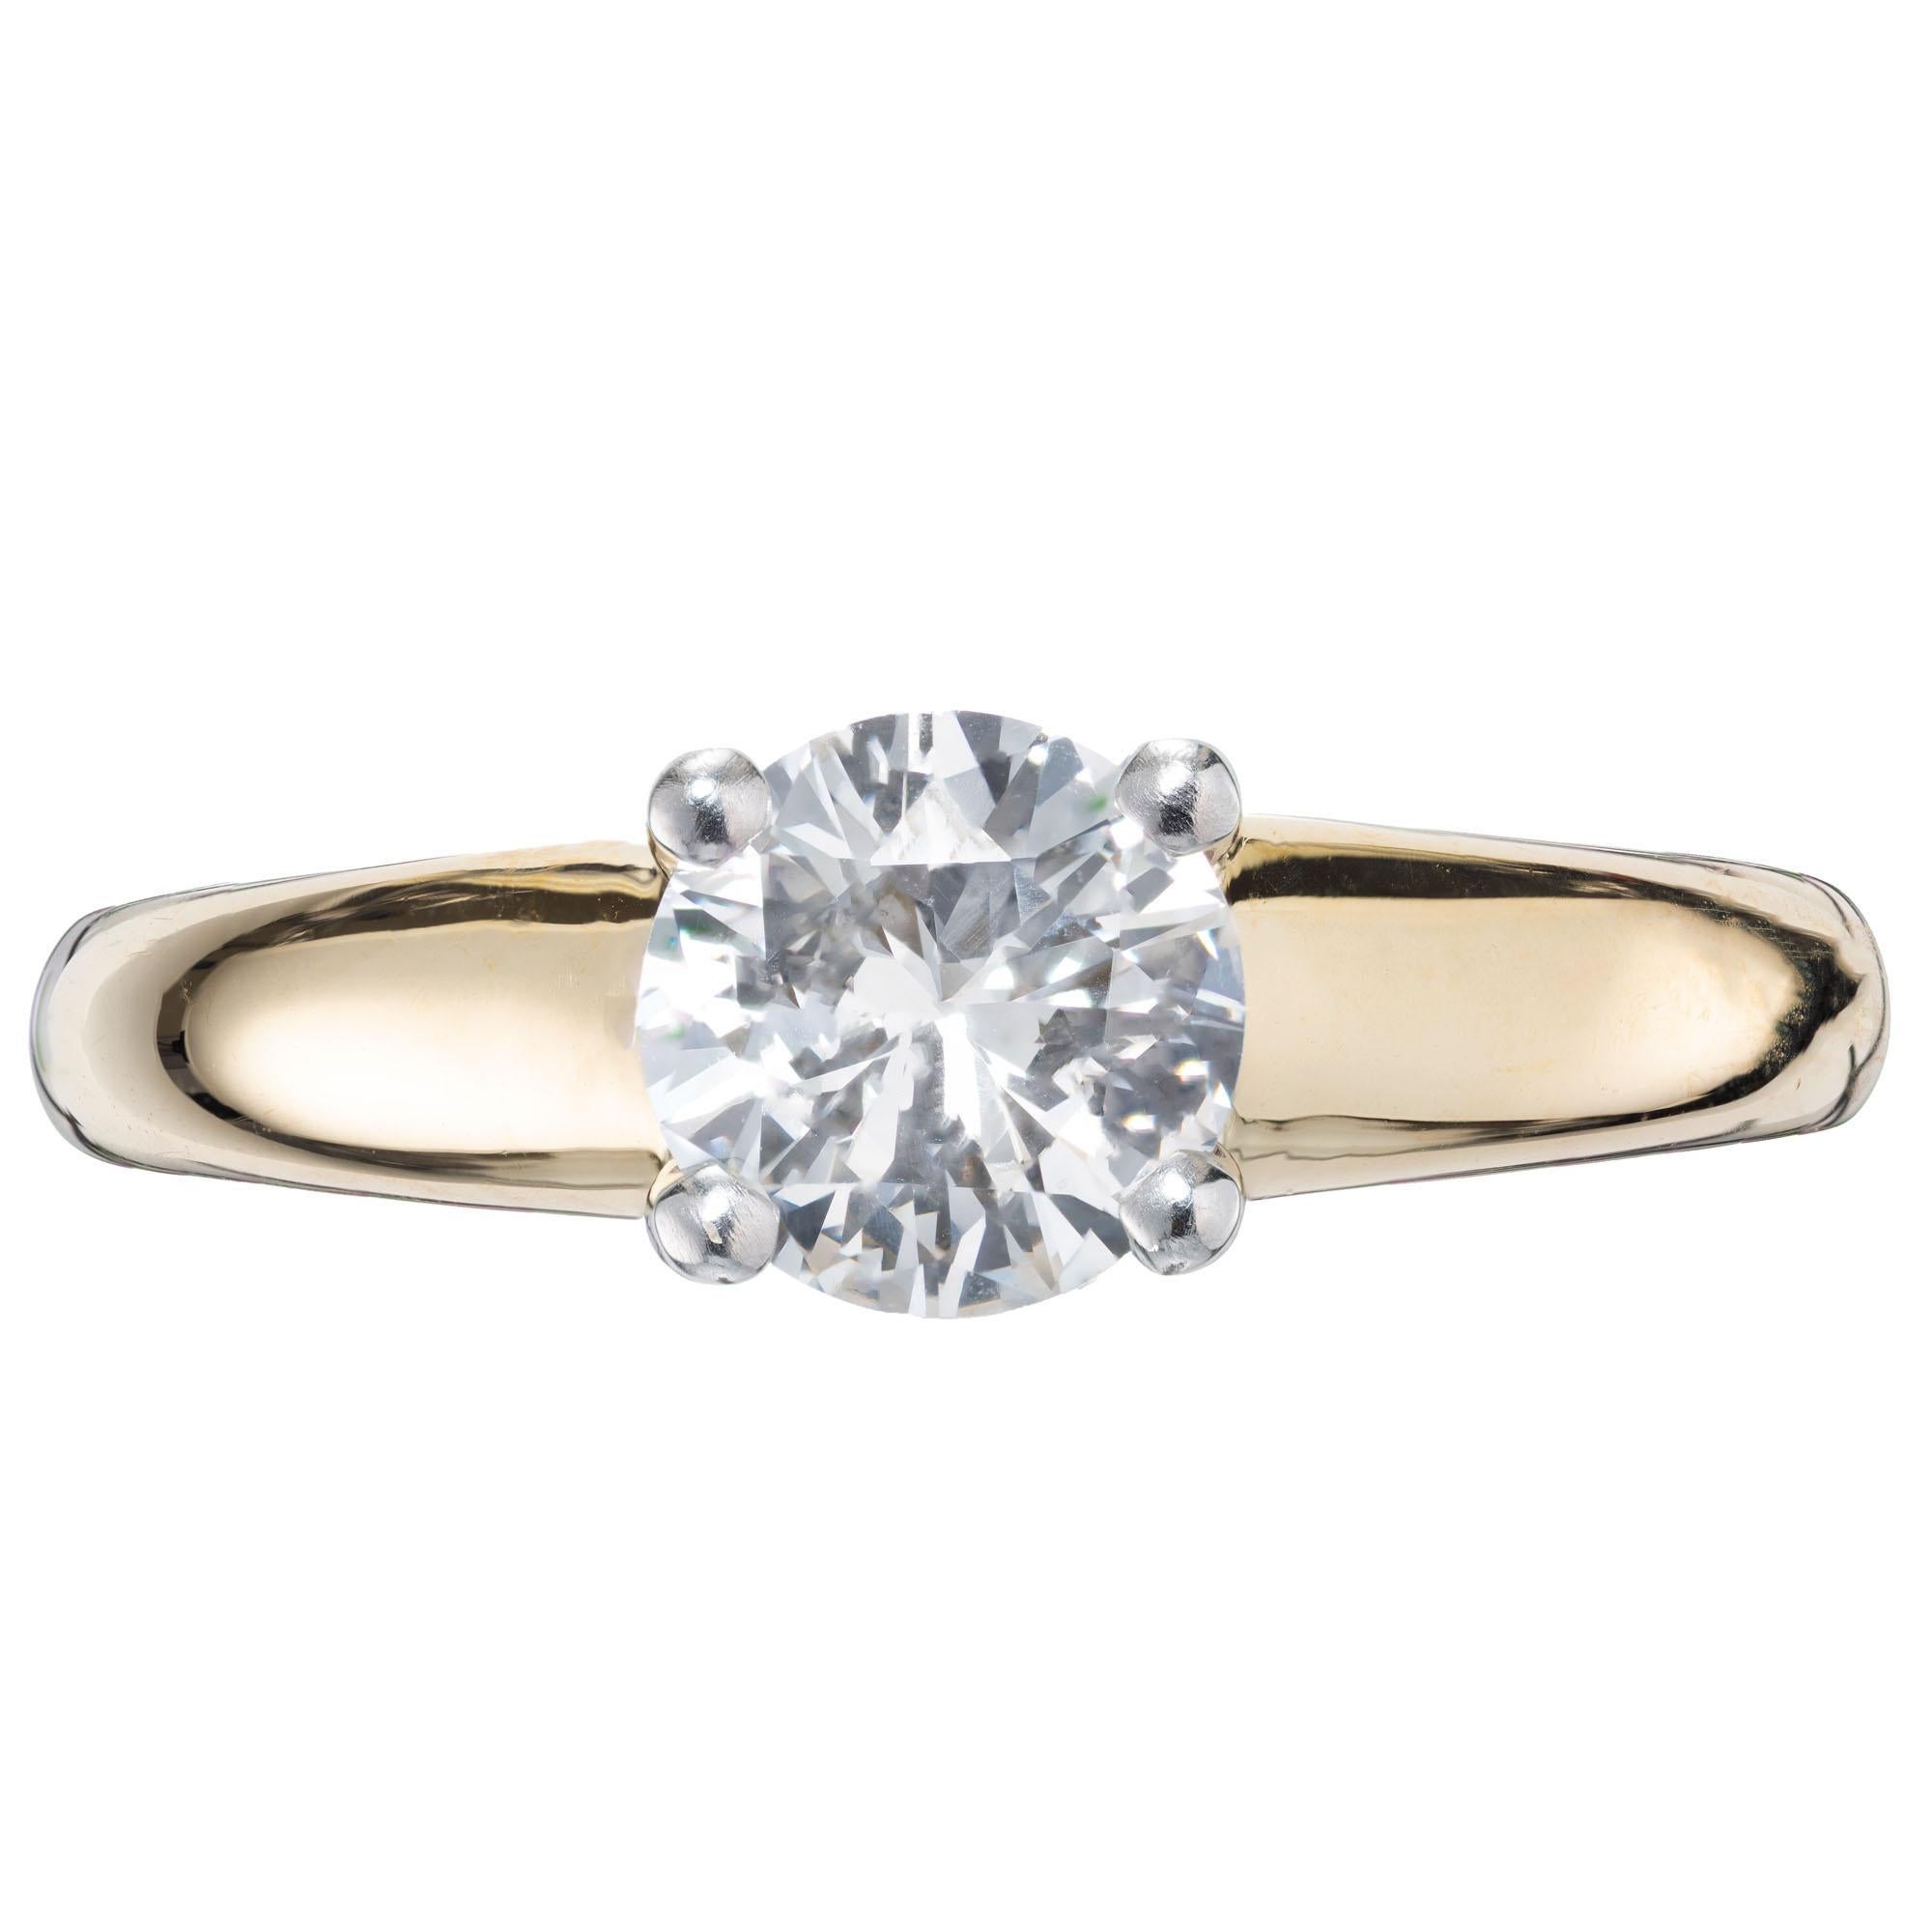 Alfred Butler solid 18k yellow gold curved platinum prong diamond solitaire engagement ring.

1 round brilliant cut diamond H-I VS, approx. 1.15ct EGL certificate # US 400132565D
Size 7.25 and sizable 
18k yellow gold 
Stamped: 18k
7.7 grams
Width